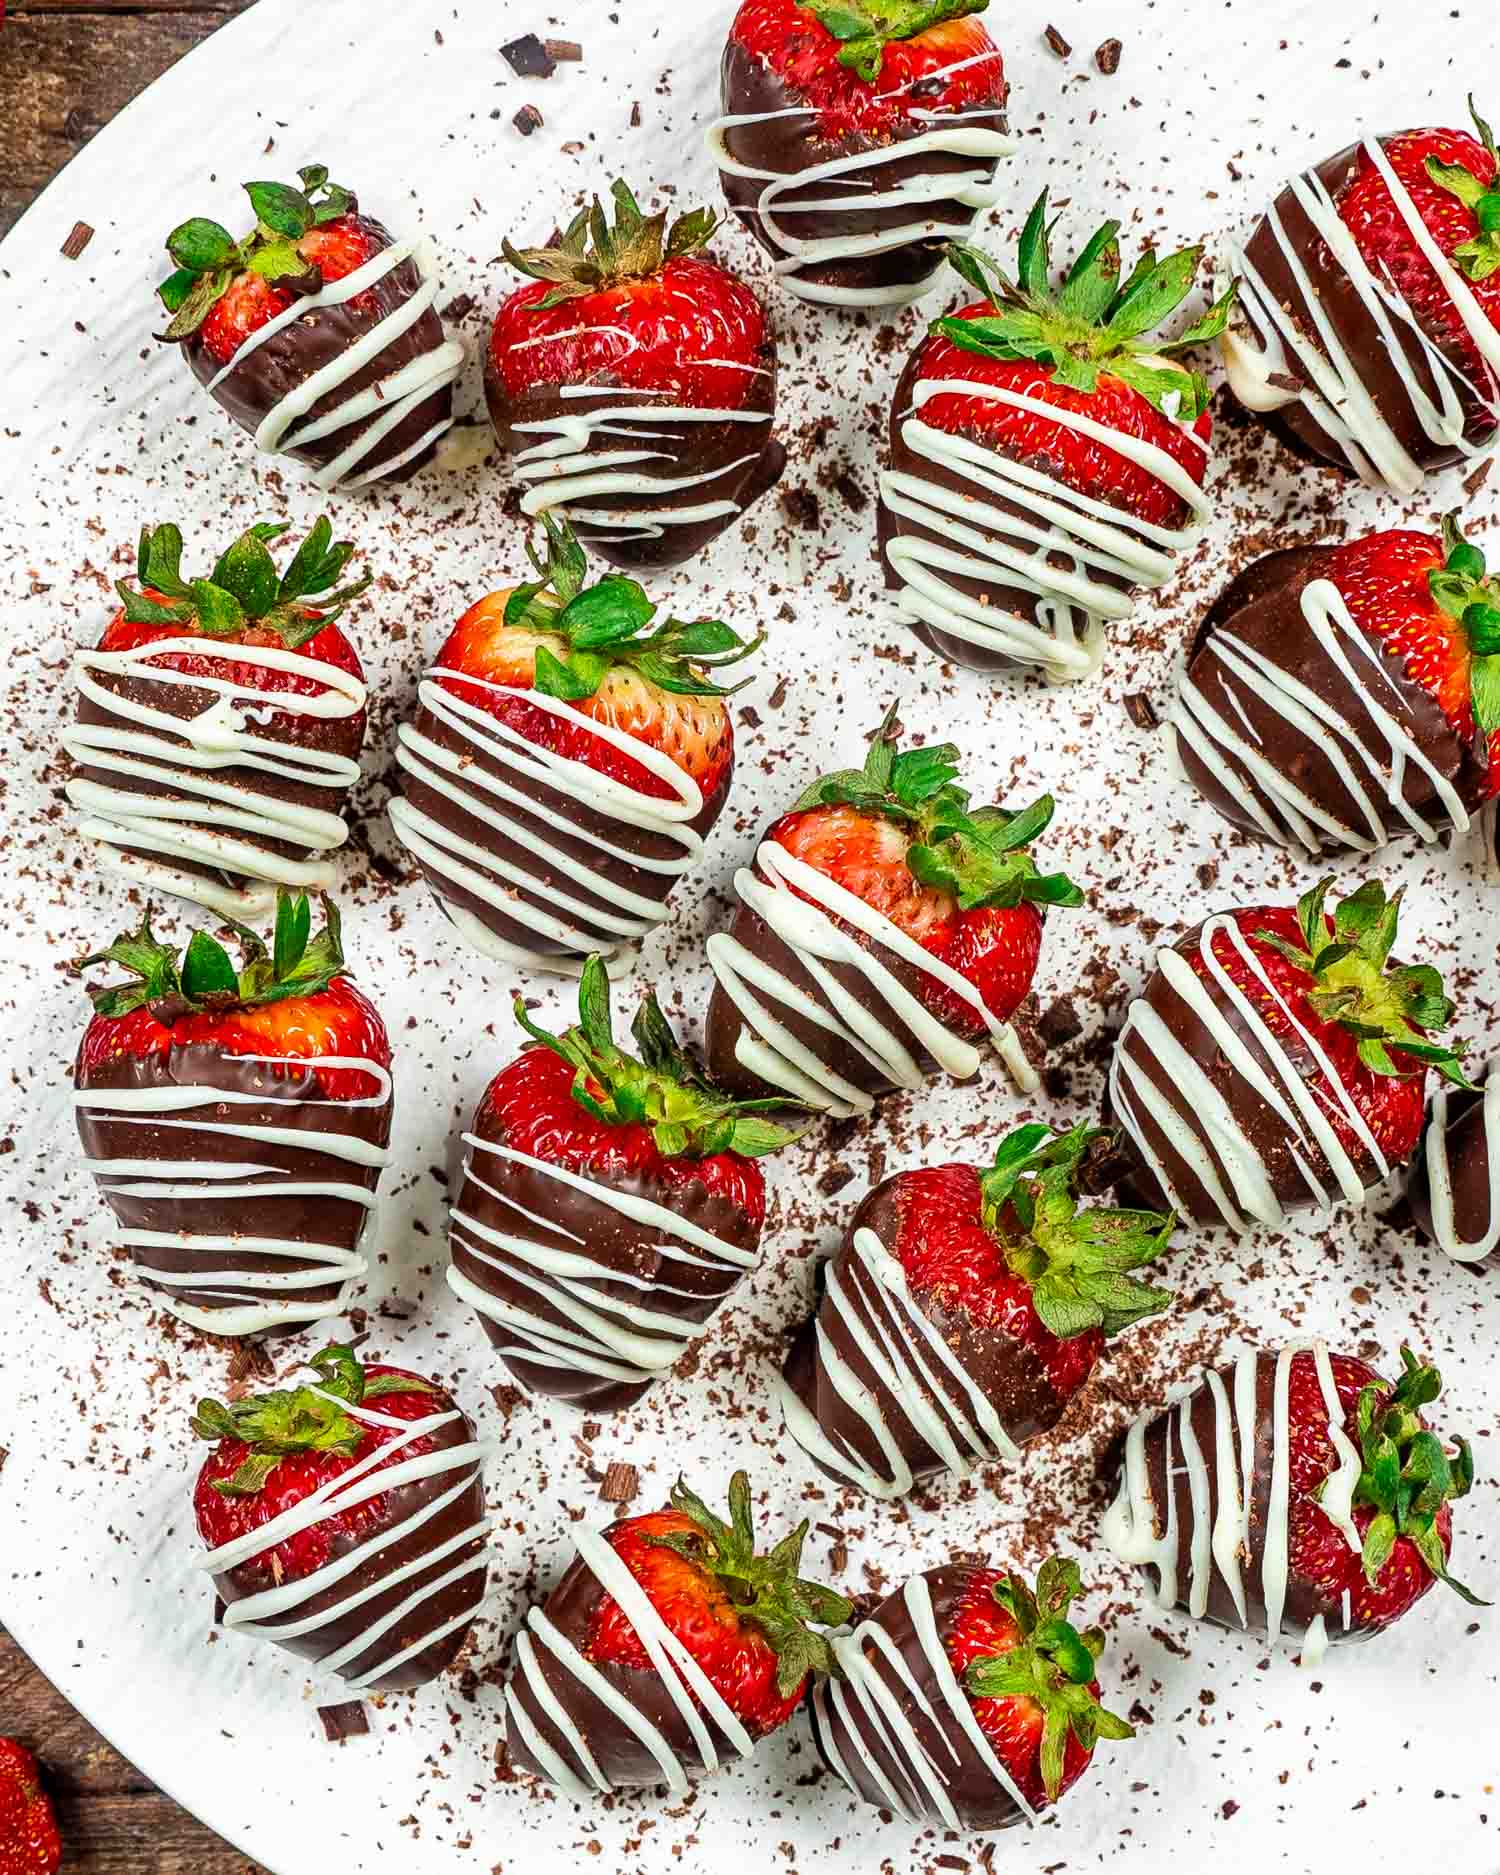 A plate of chocolate-covered strawberries with white chocolate drizzle, ready for a sweet Valentine's treat.